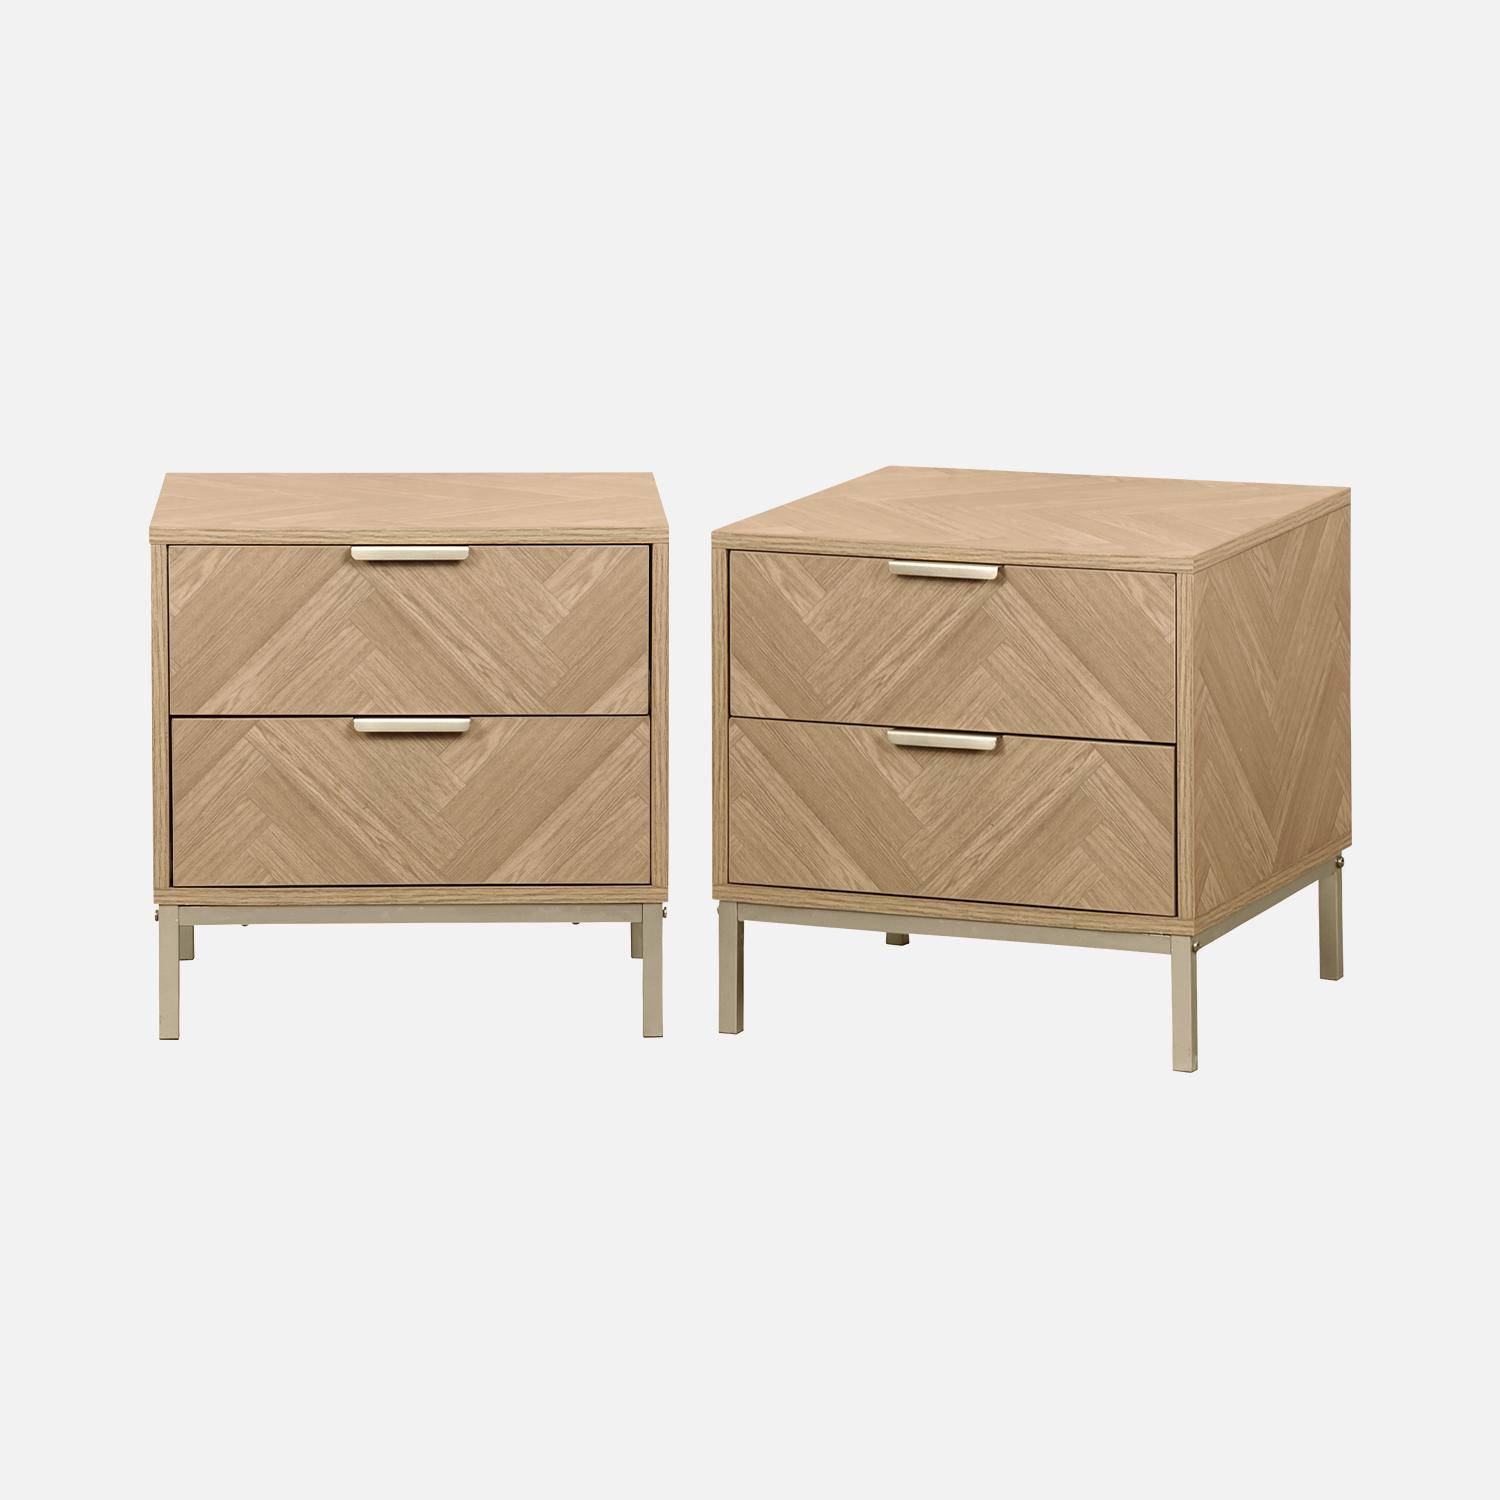 Pair of  contemporary Herringbone bedside table with 2 drawers Photo7